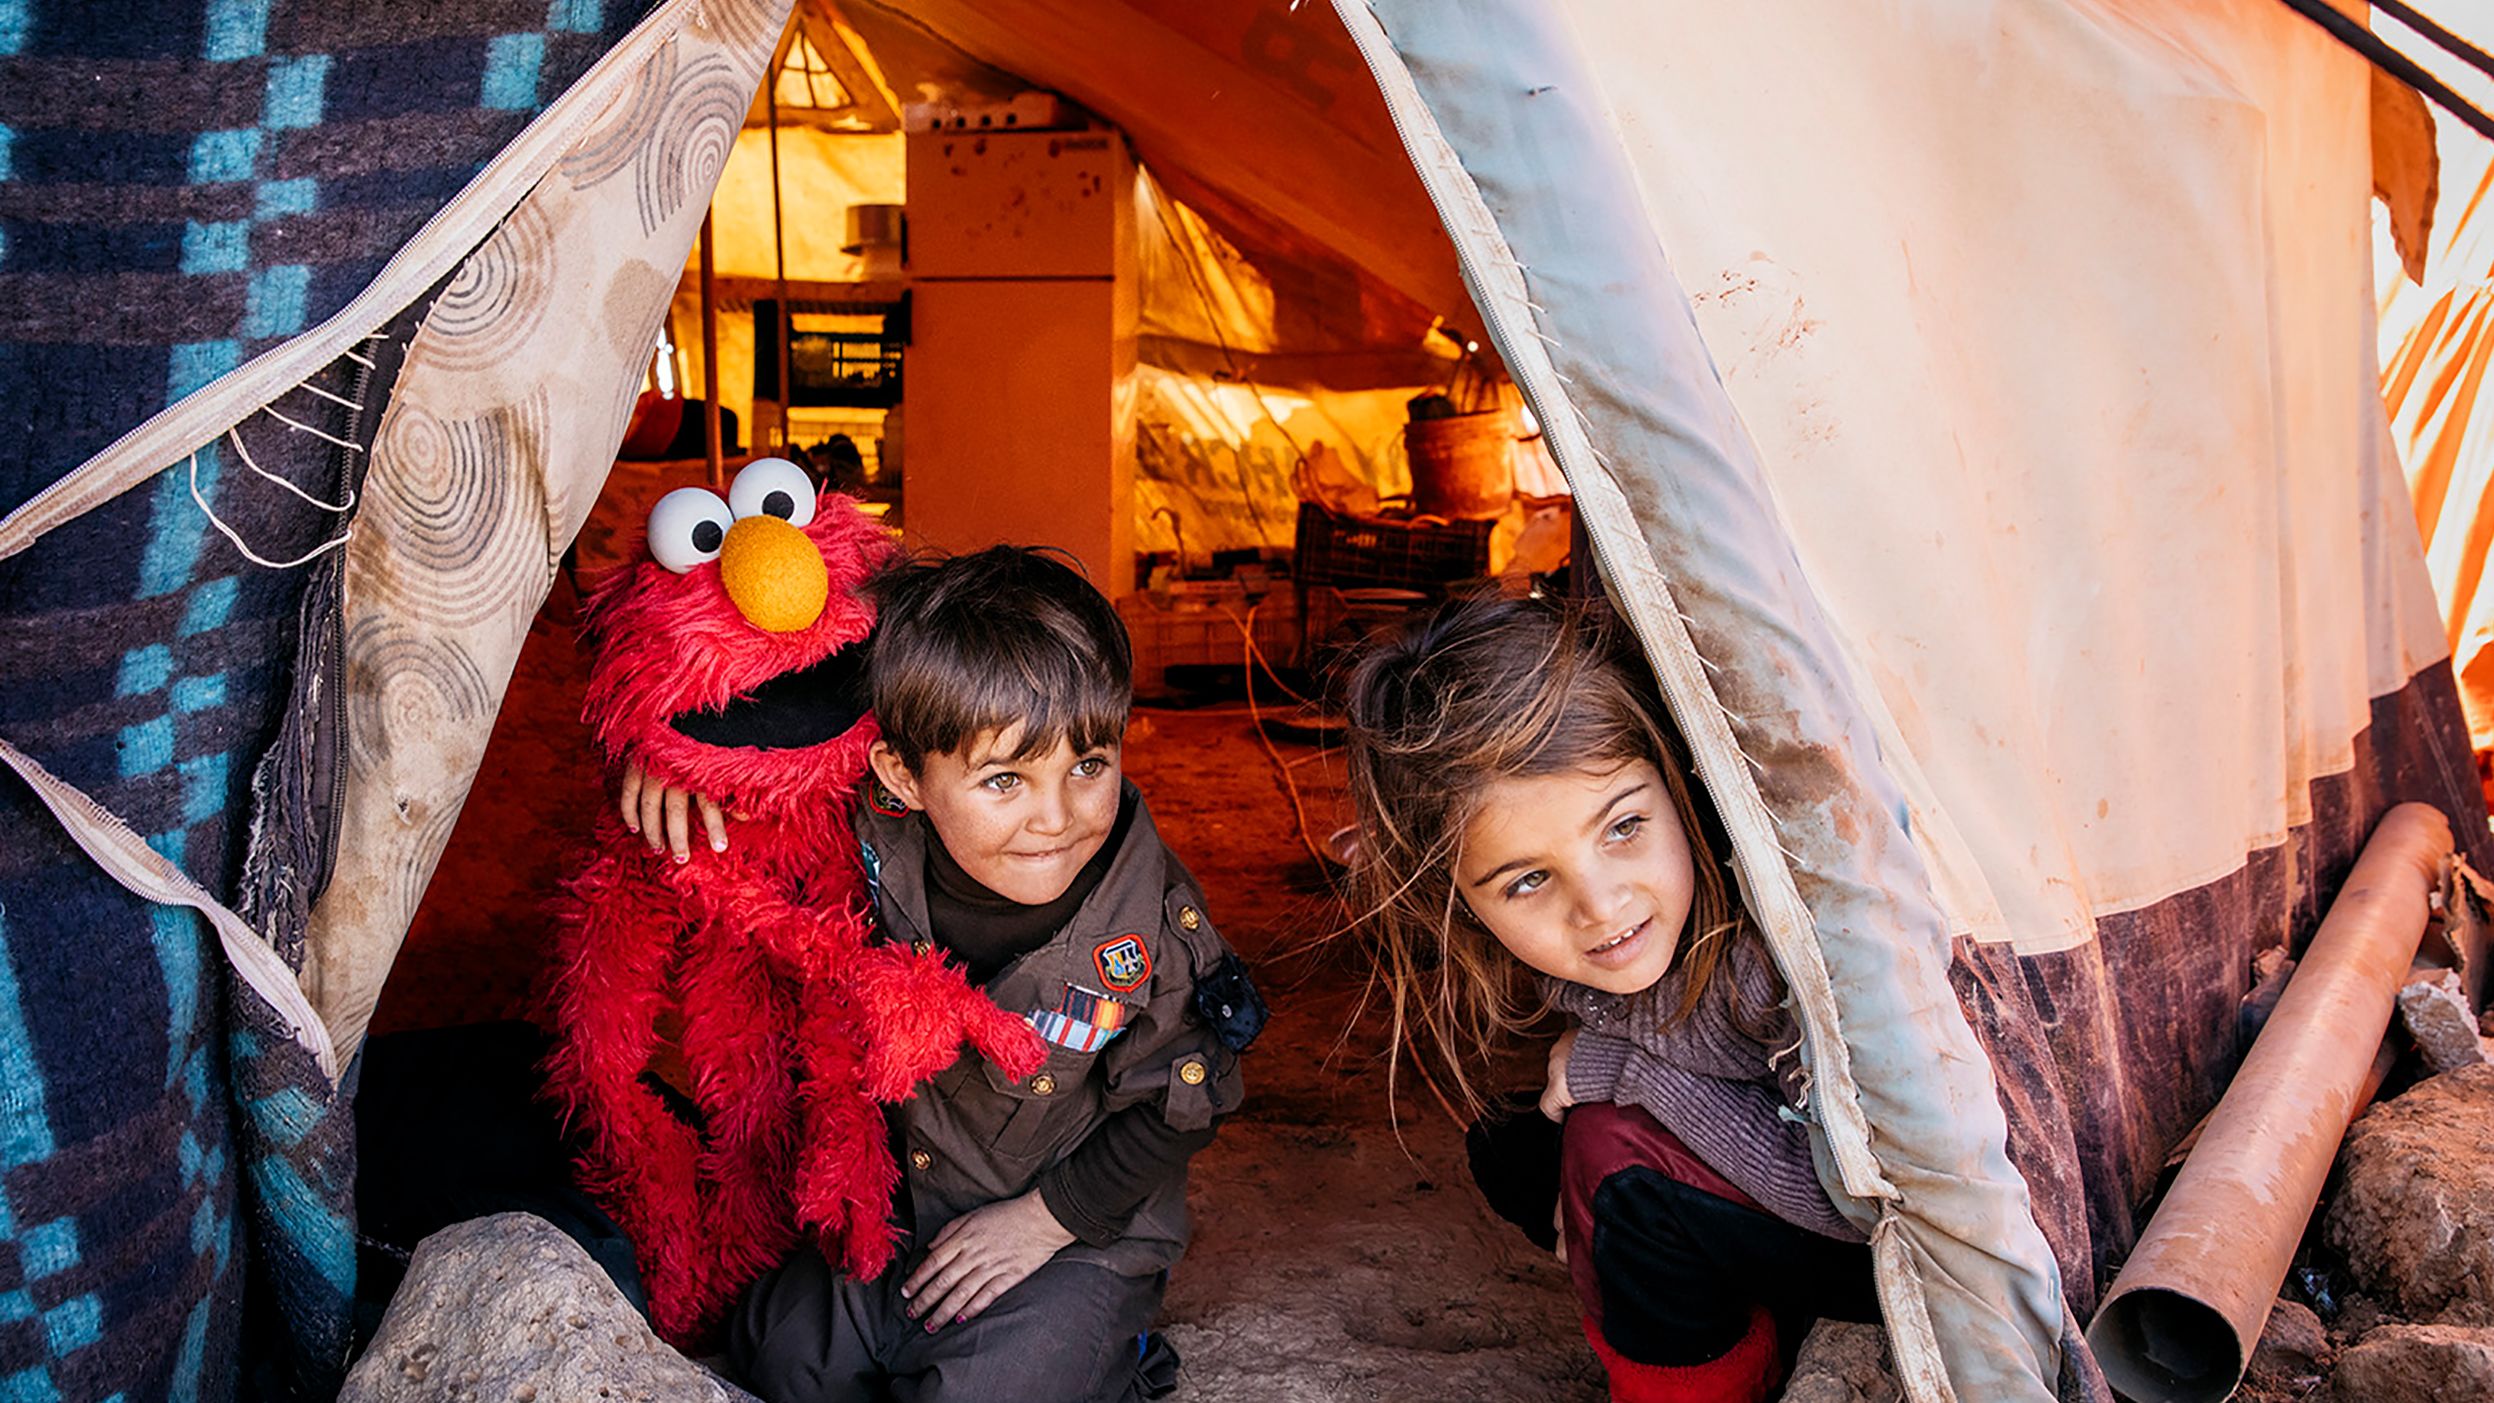 "Sesame Street" and the International Rescue Committee have collaborated in efforts to help Syrian refugee children. A new program called "Ahlan Simsim" is set to air in February 2020.